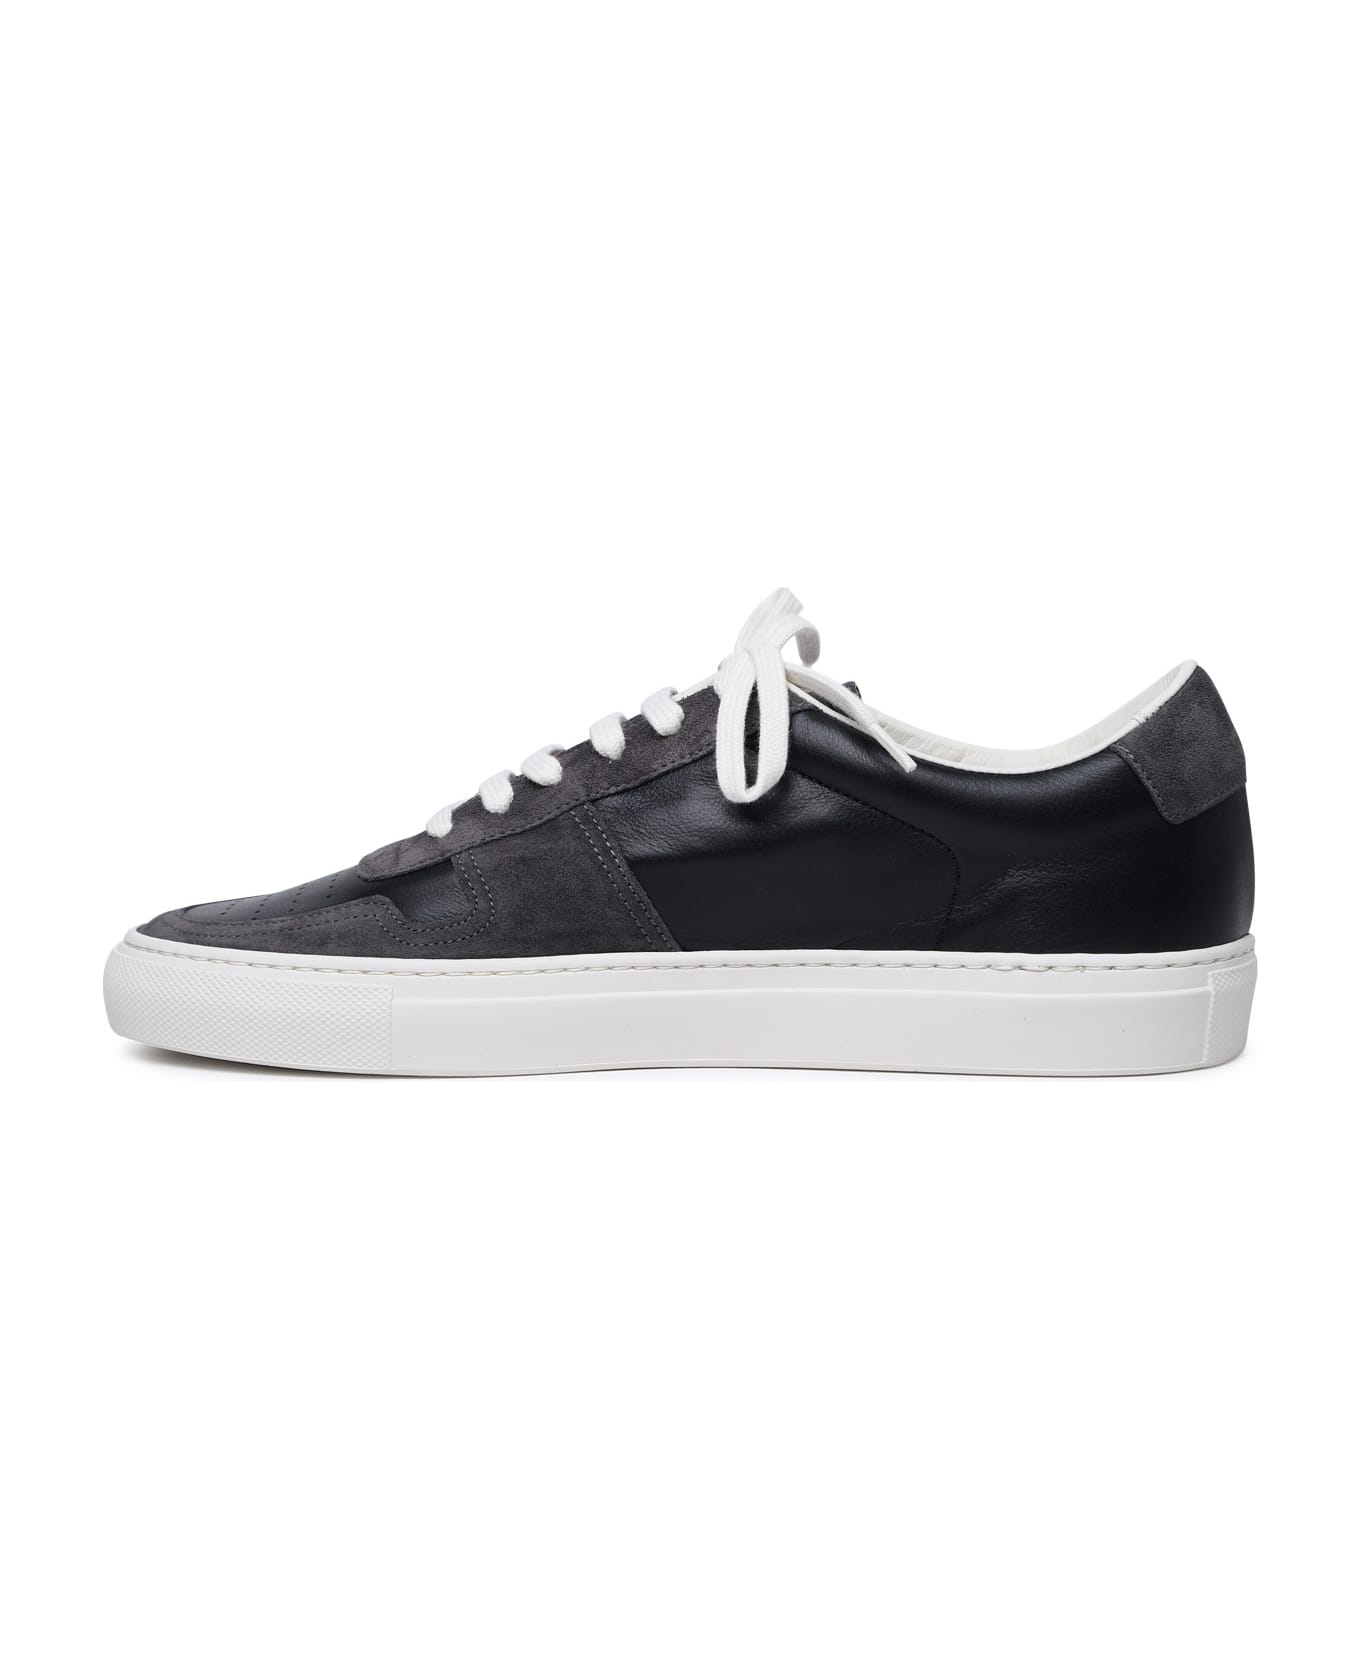 Common Projects 'bball Duo' Black Leather Sneakers - Black スニーカー